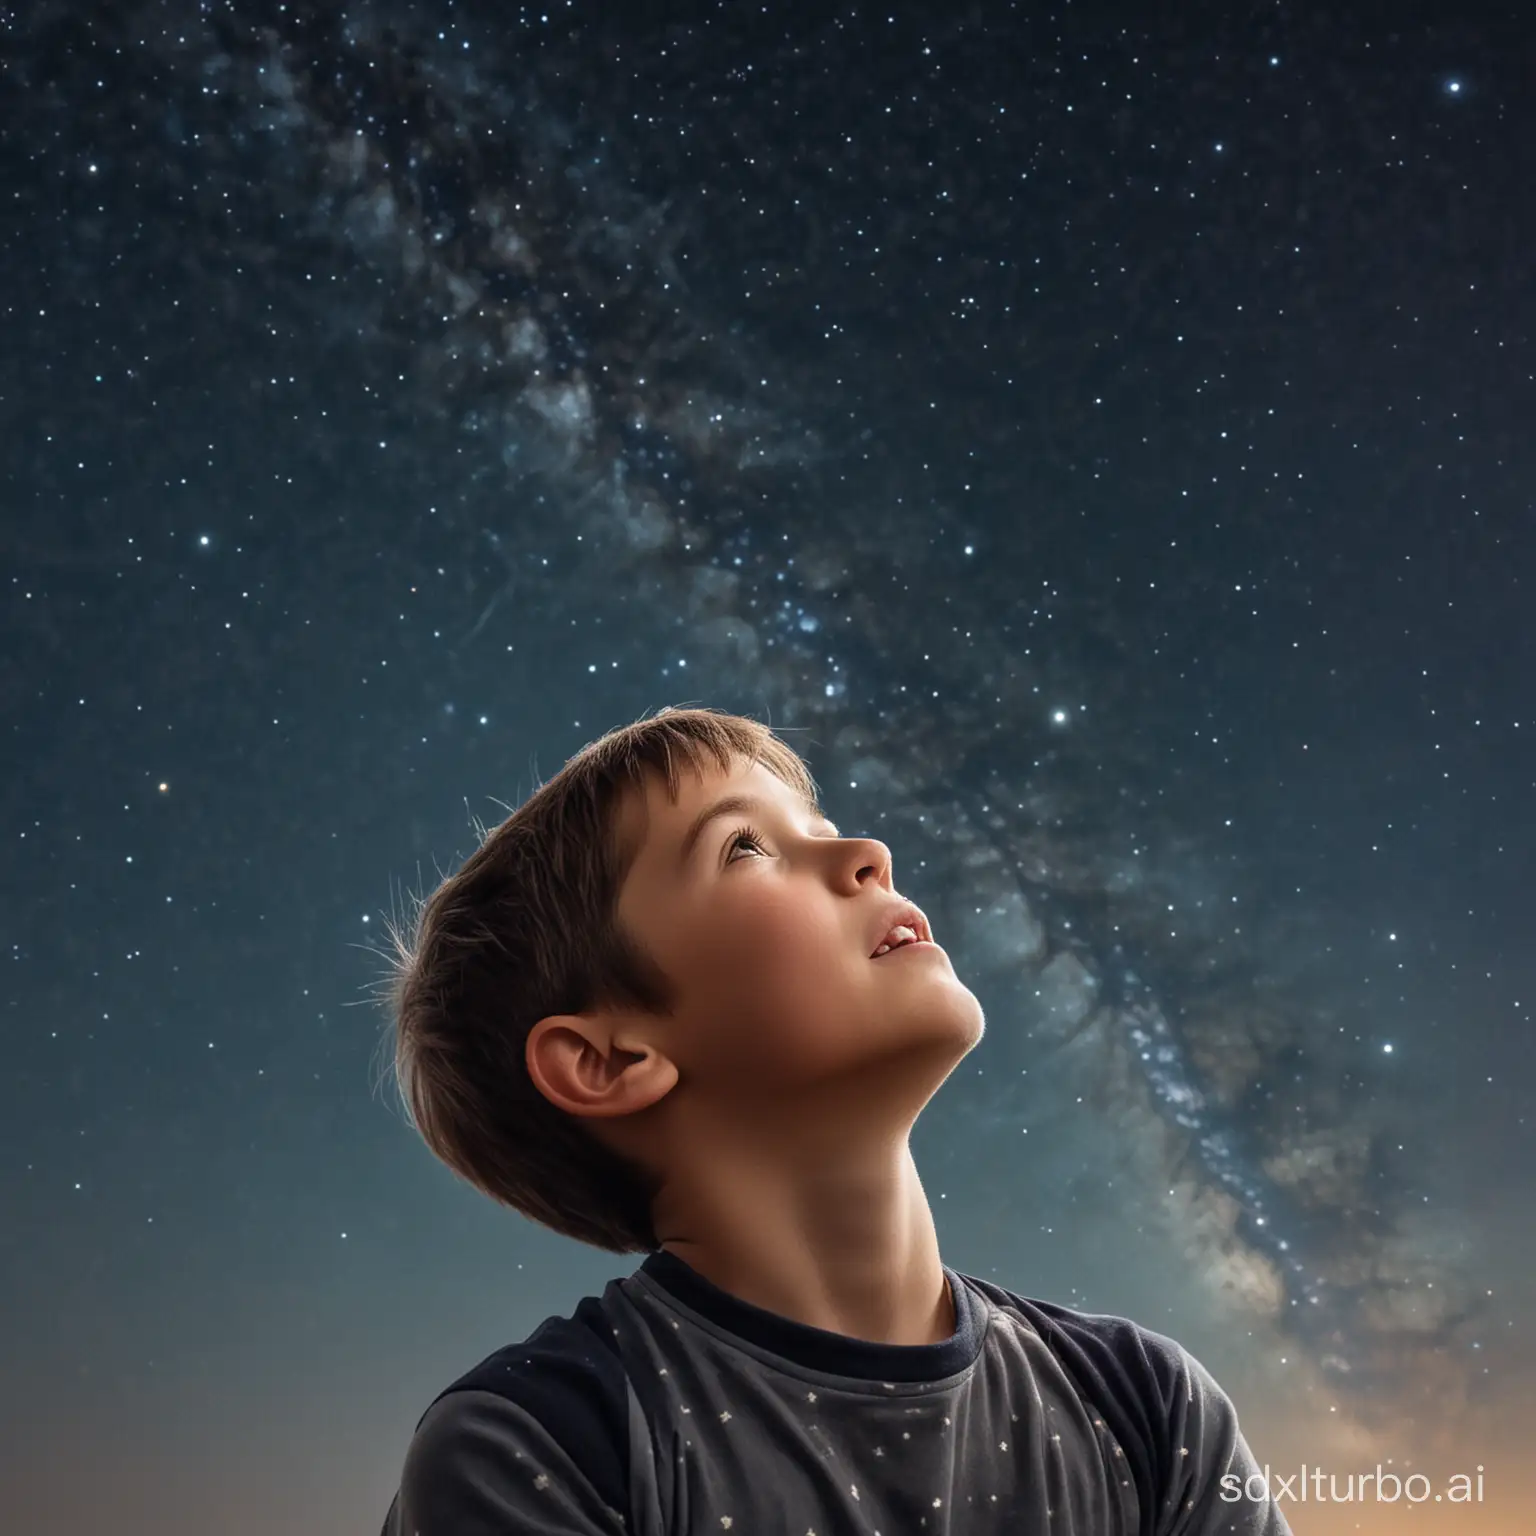 The little boy looking up at the starry sky.